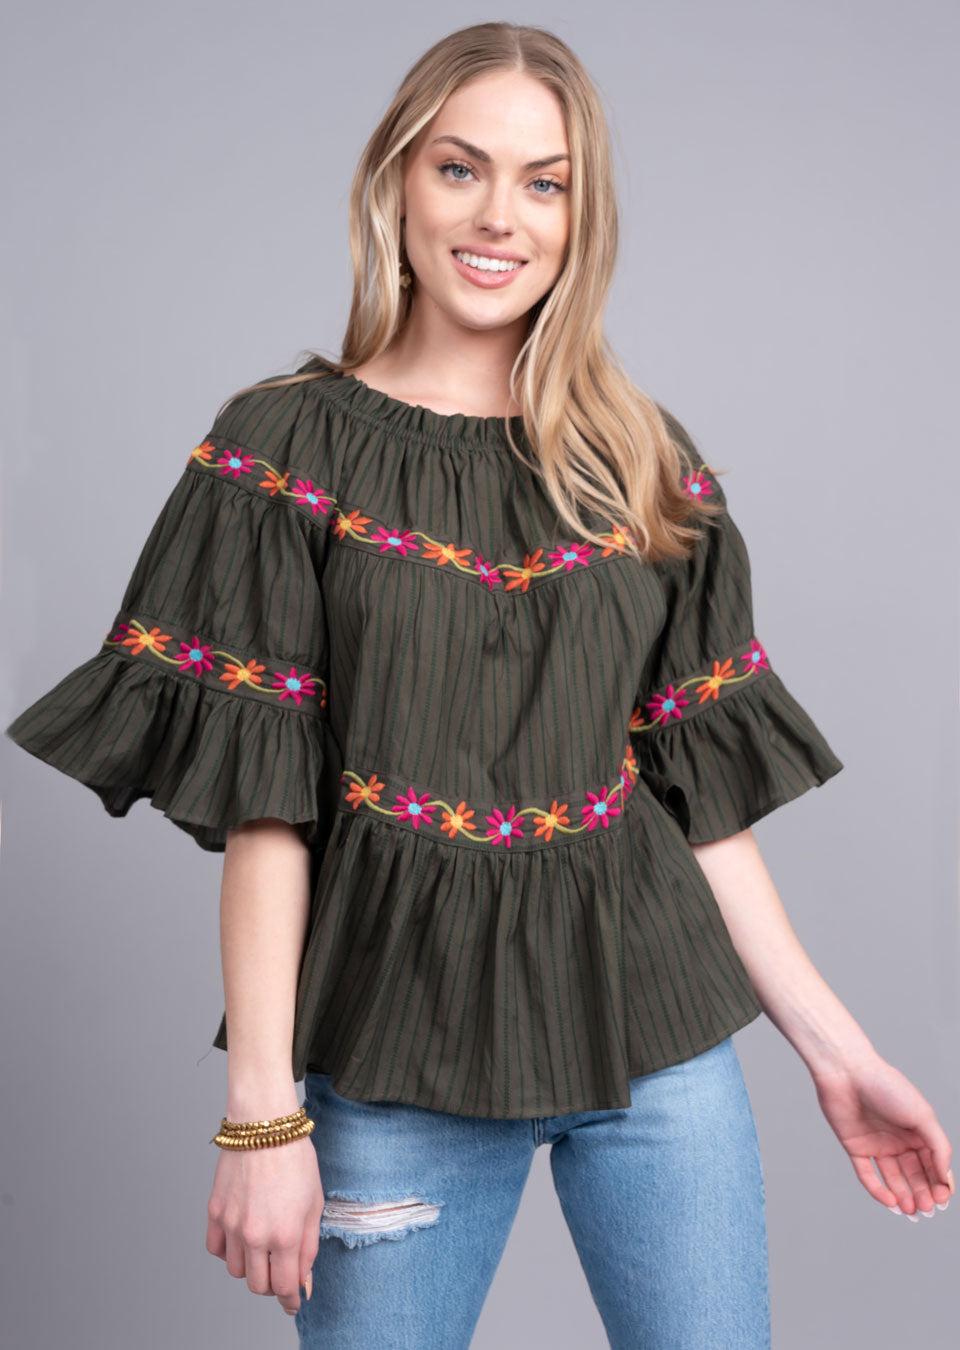 Ivy Jane / Uncle Frank Bands of Flowers Top Shirts & Tops - The Attic Boutique